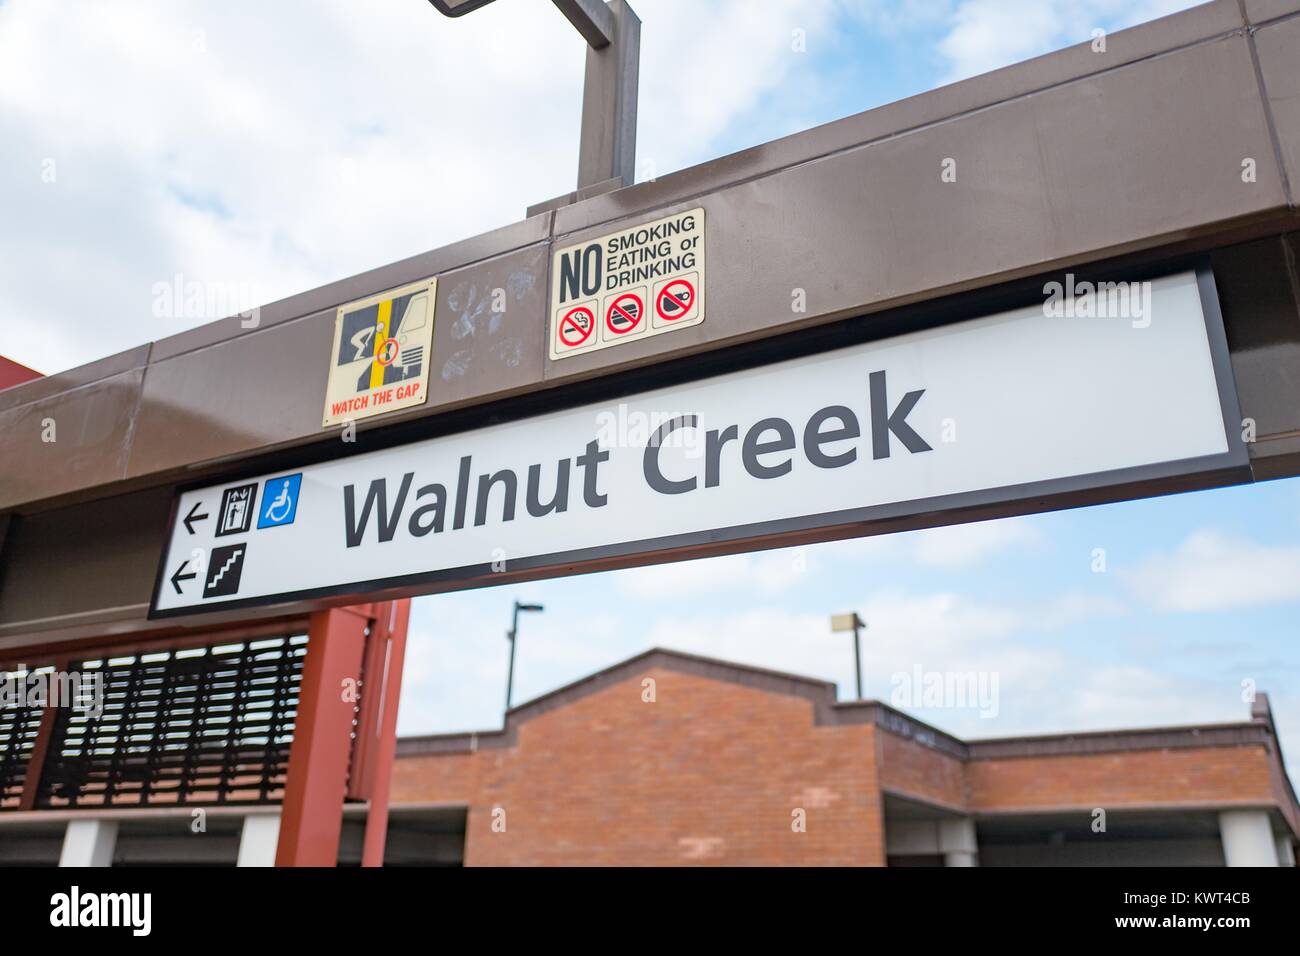 Sign for the Walnut Creek, California station of the Bay Area Rapid Transit (BART) light rail system, September 13, 2017. Stock Photo